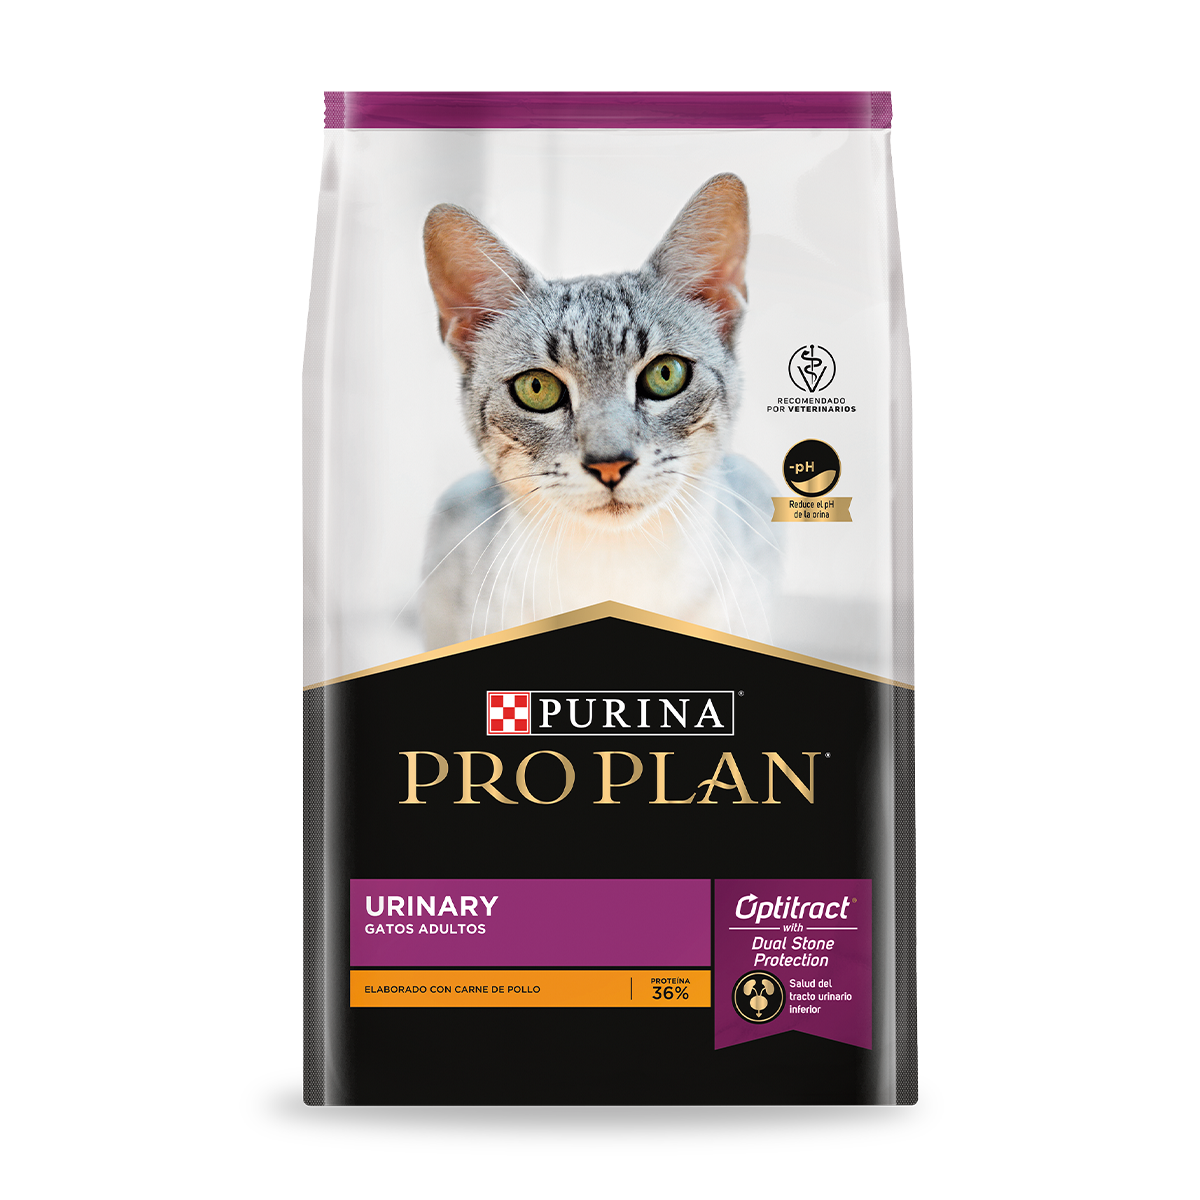 purina-pro-plan-dry-cat-urinary.png